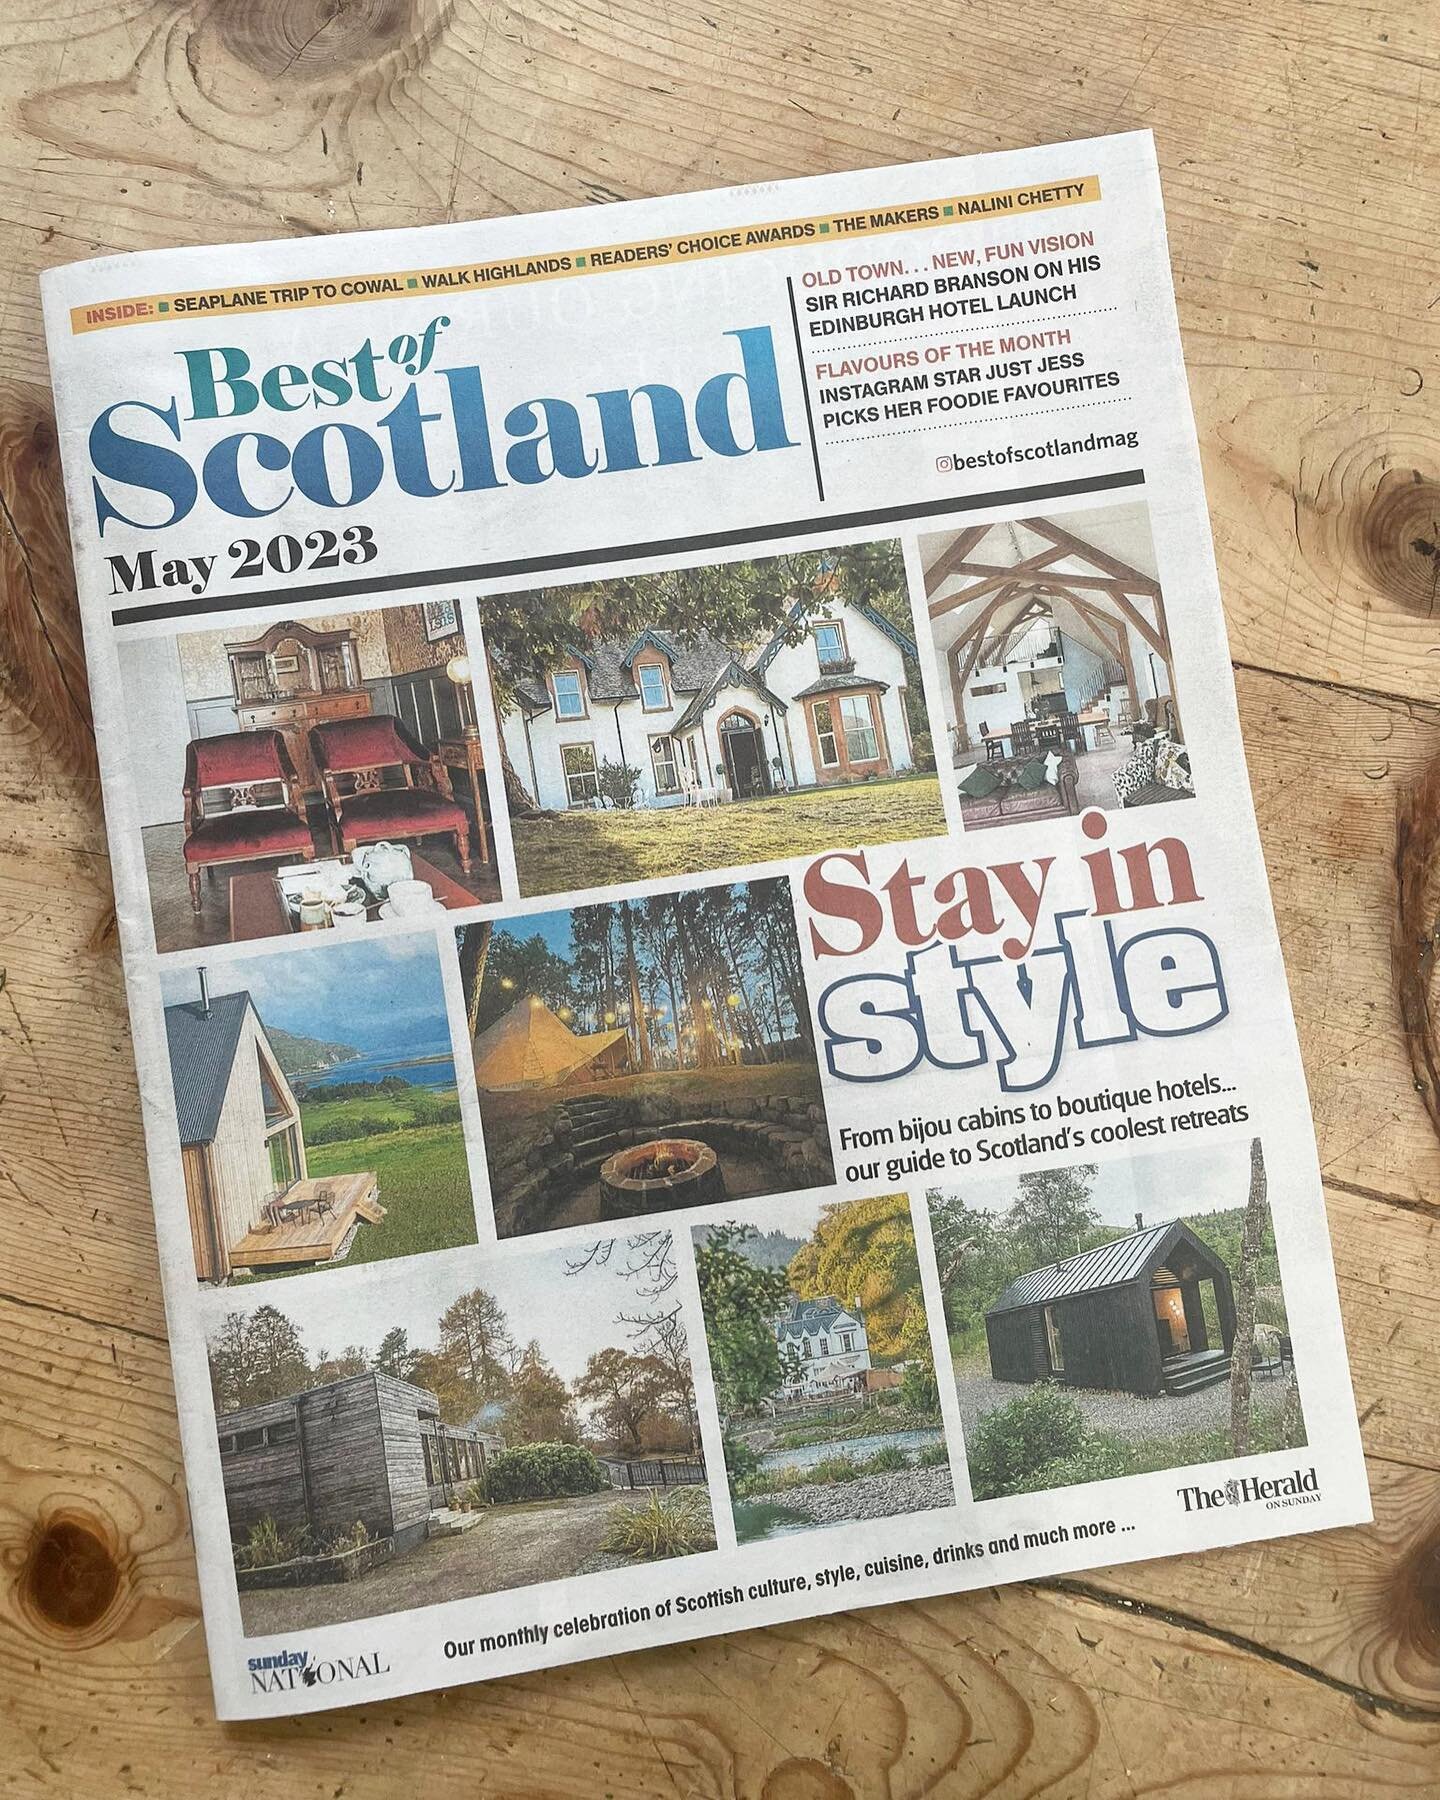 Lovely mention in this weekend&rsquo;s Herald @bestofscotlandmag alongside some great company. Thanks @ailsa_sheldon for including us and @greatglencharcuterie for the photos!

#scottishstays #bestofscotland